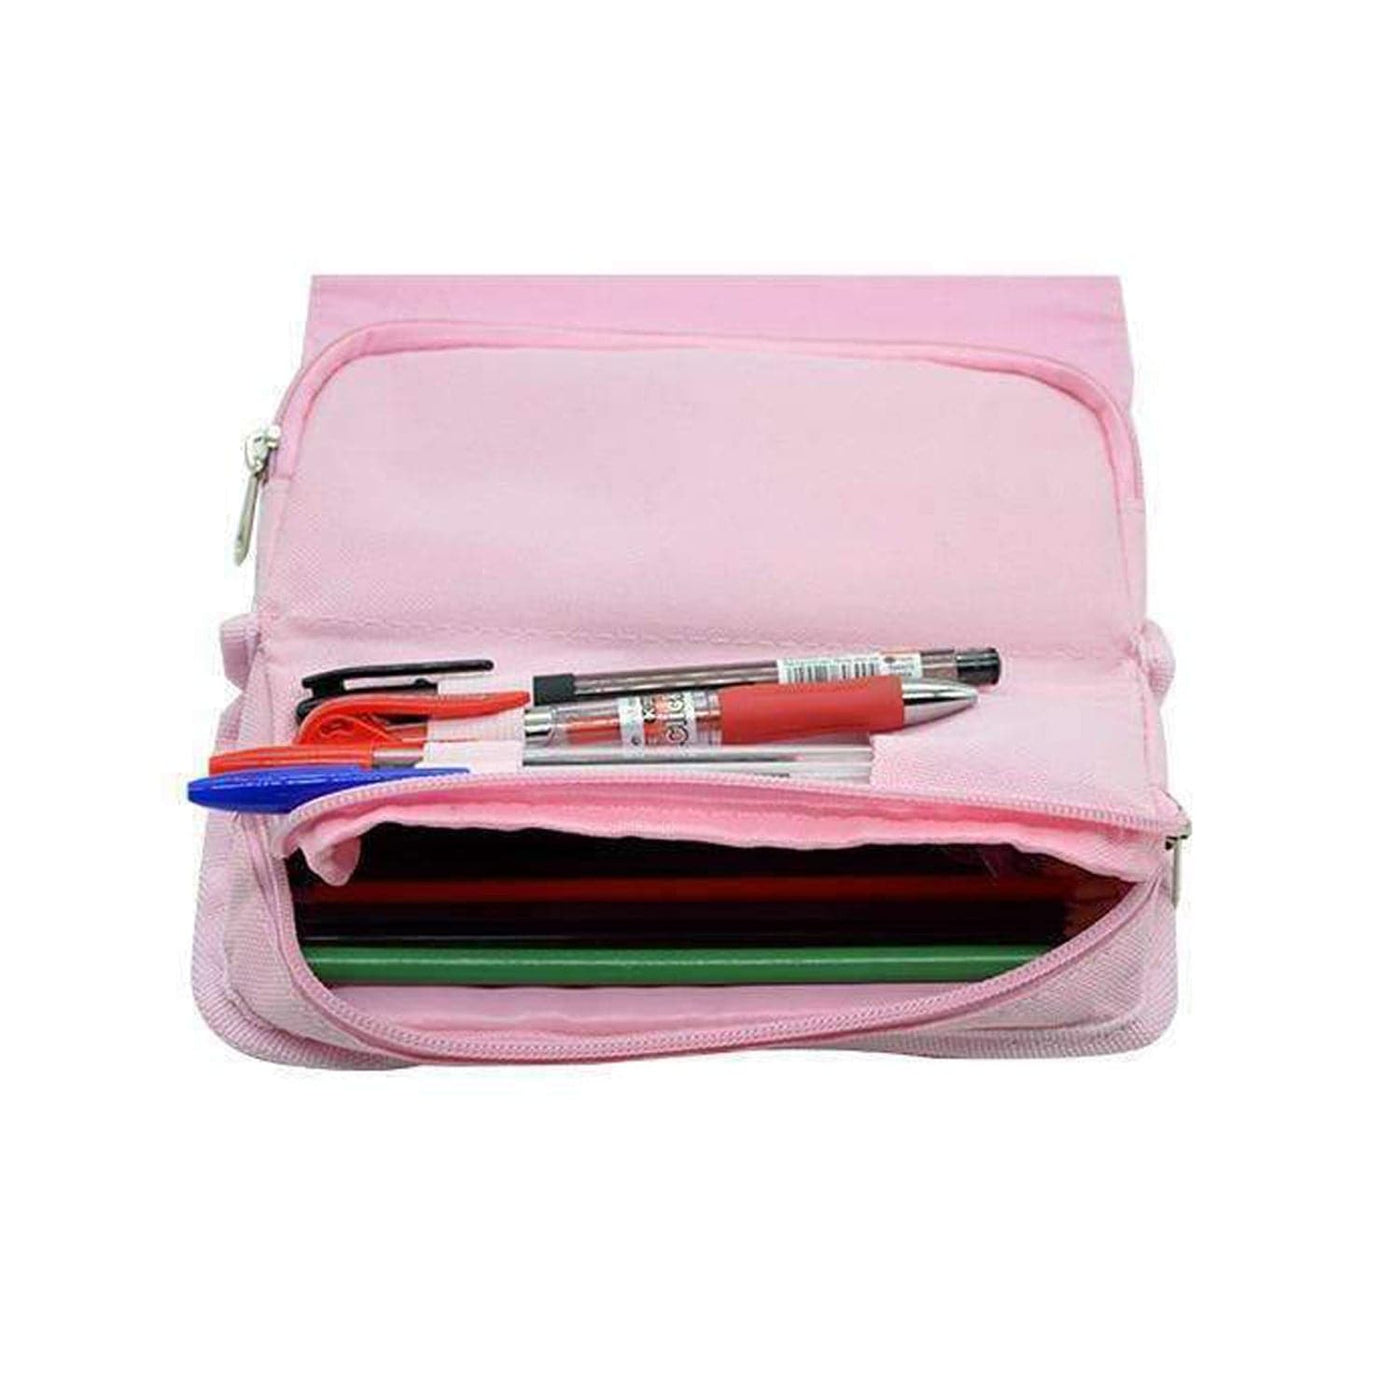 On The Nice List - Naughty Or Nice  Pencil Case